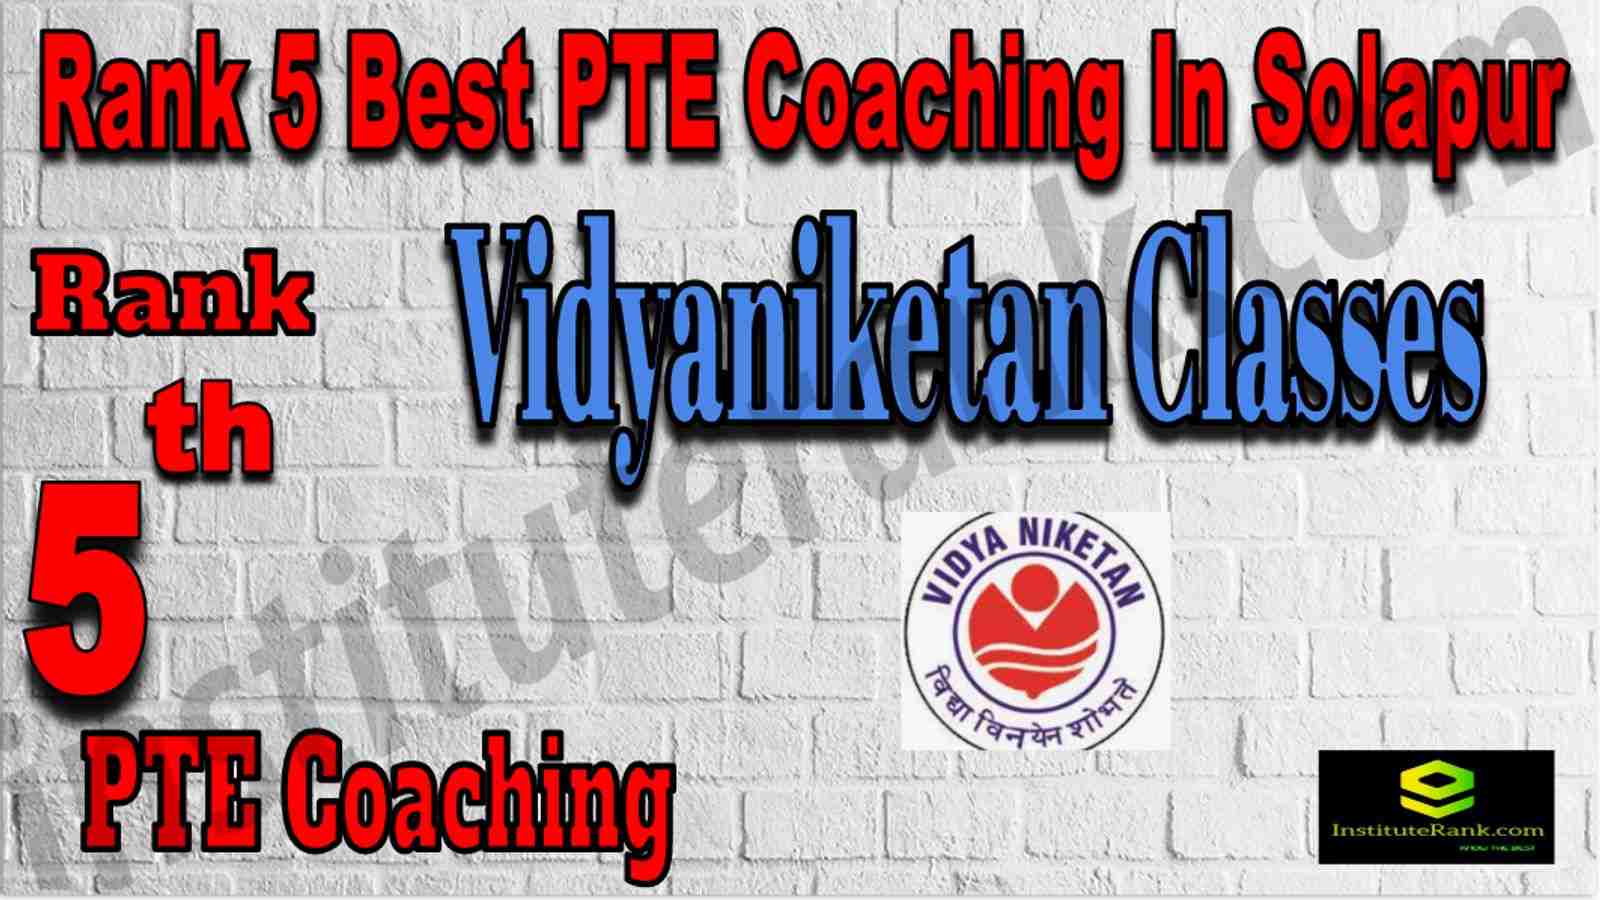 5th Best PTE Coaching In Solapur